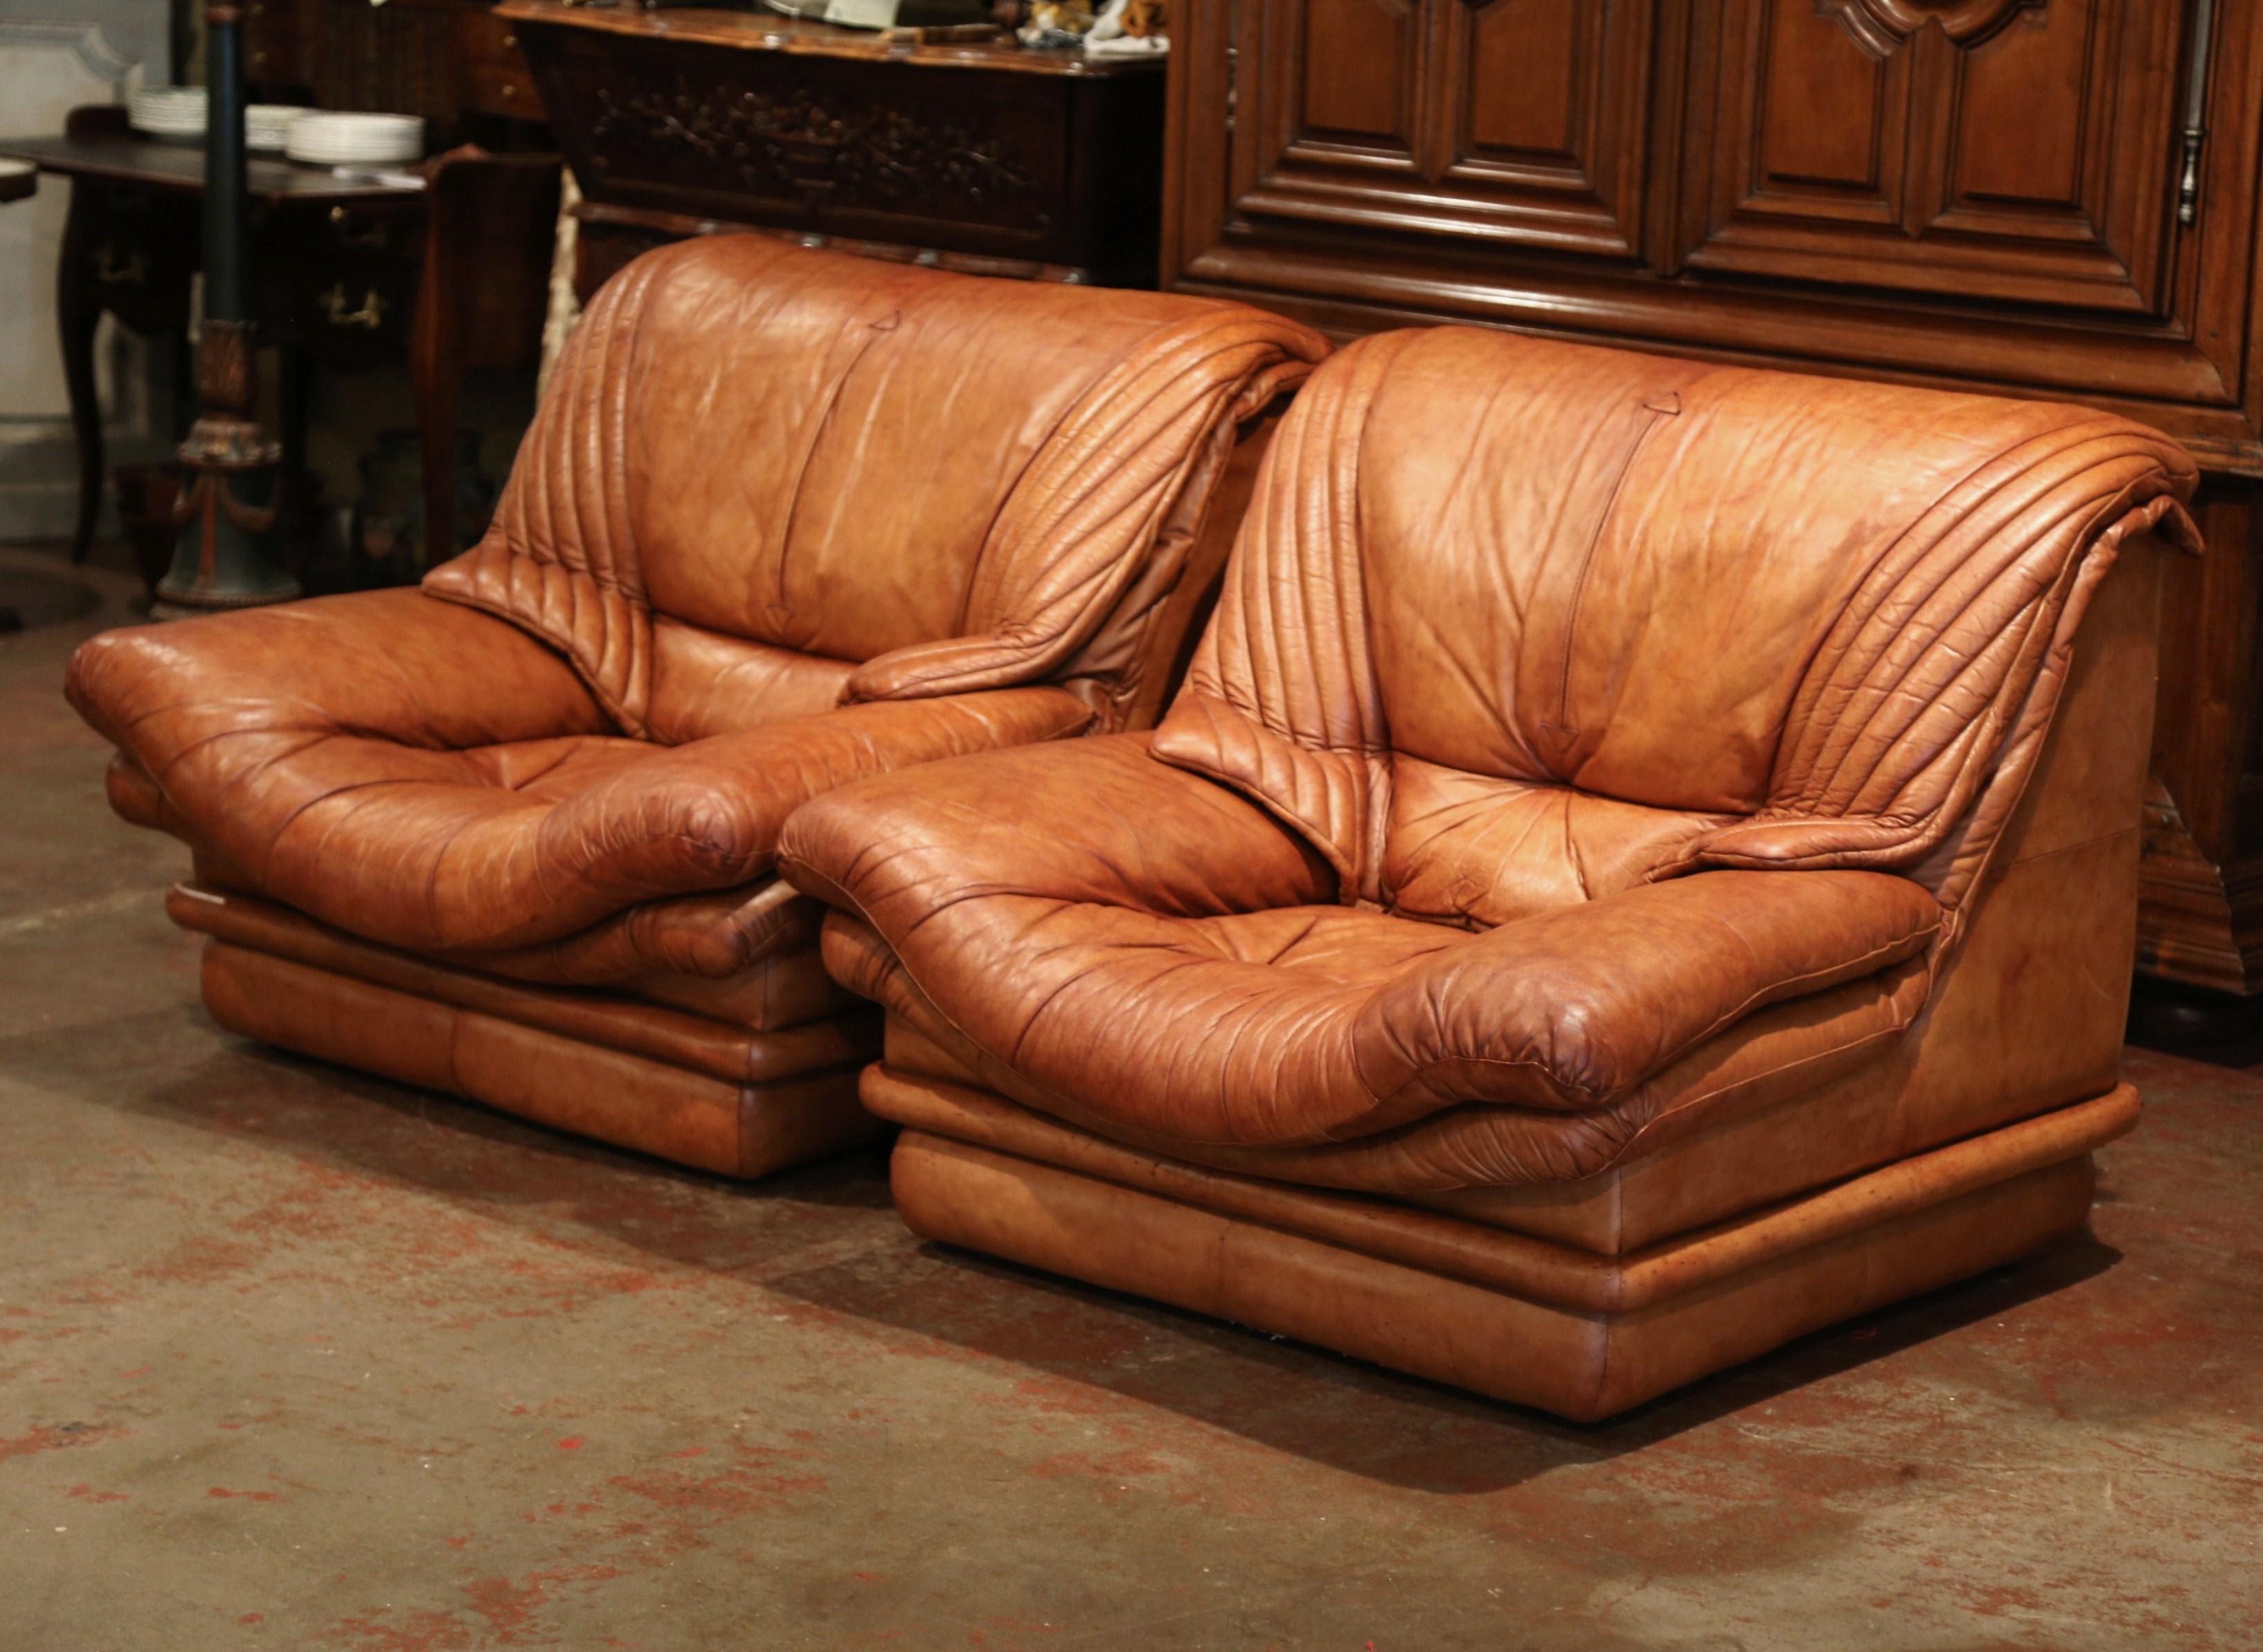 Pair of Mid-20th Century French Patinated Tan Leather Club Armchairs (Handgefertigt)